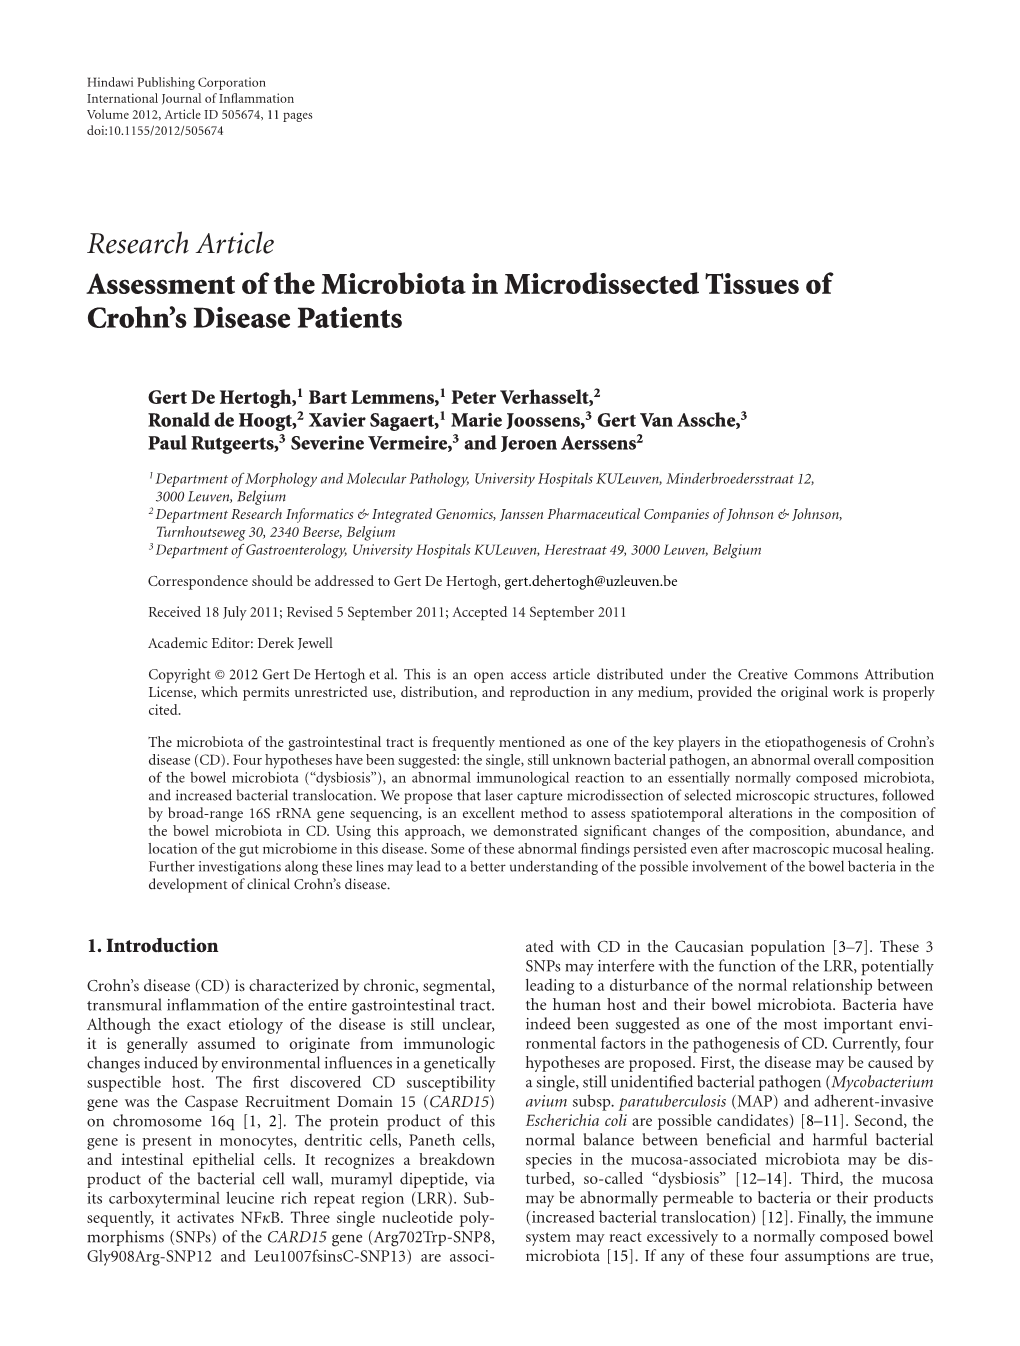 Assessment of the Microbiota in Microdissected Tissues of Crohn's